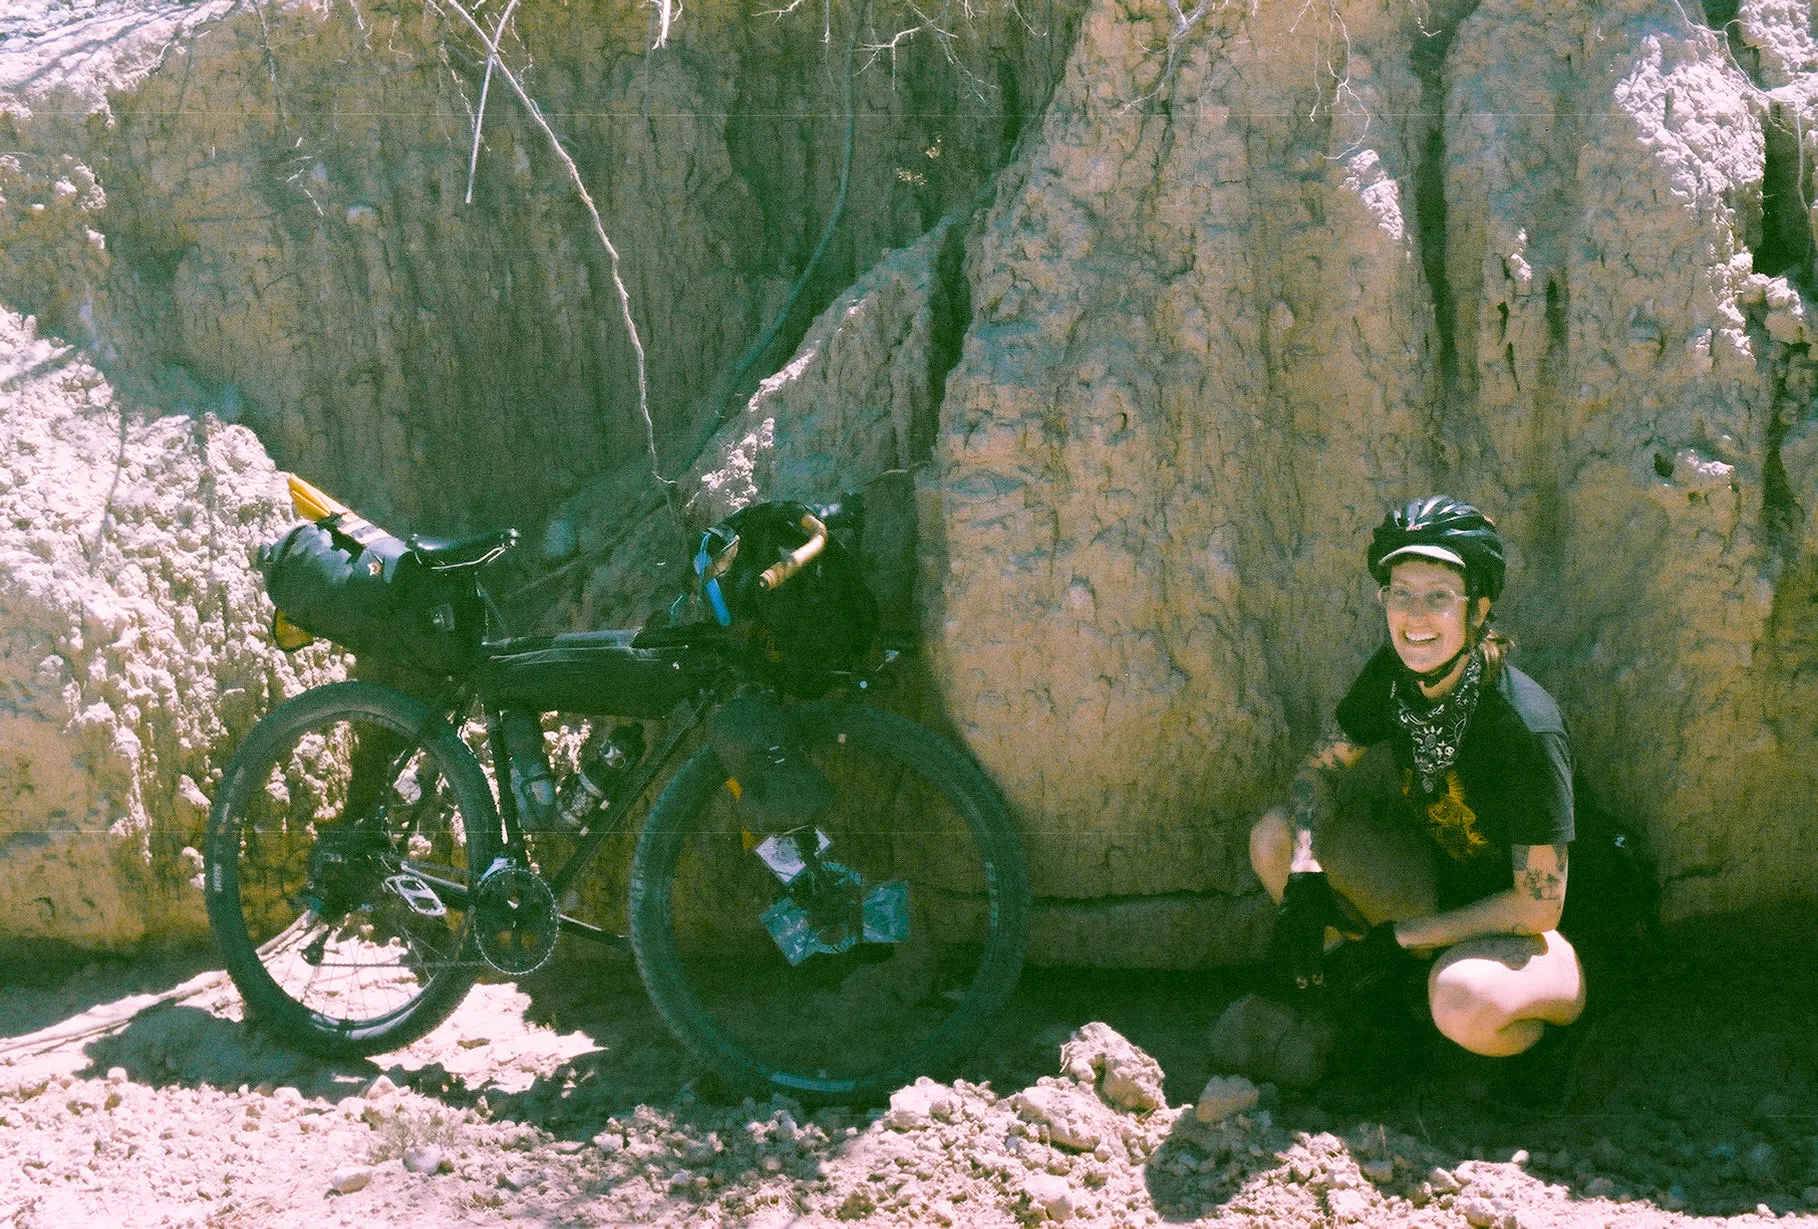 Brenda Croell writes about riding her Otso Cycles Warakin Stainless in the Sonoran Desert.